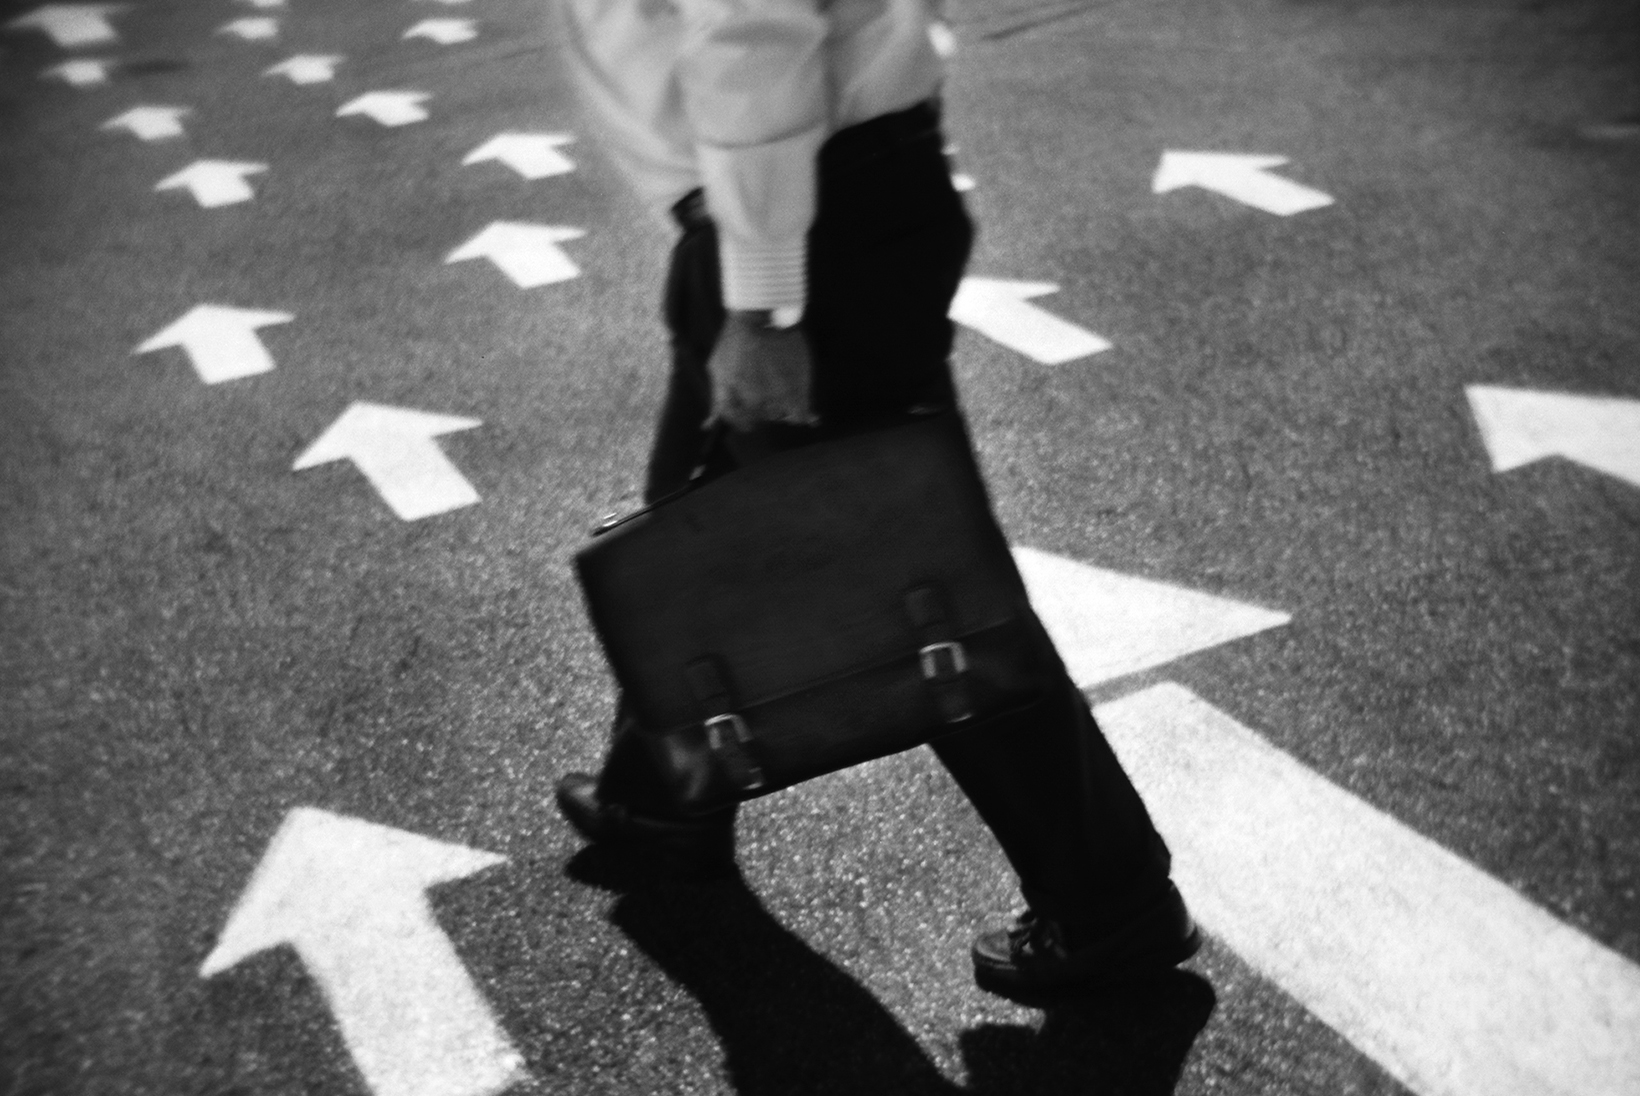 A man shown from the neck down in business attire carrying a briefcase is walking on pavement that has white arrows pointing in the direction he is walking.